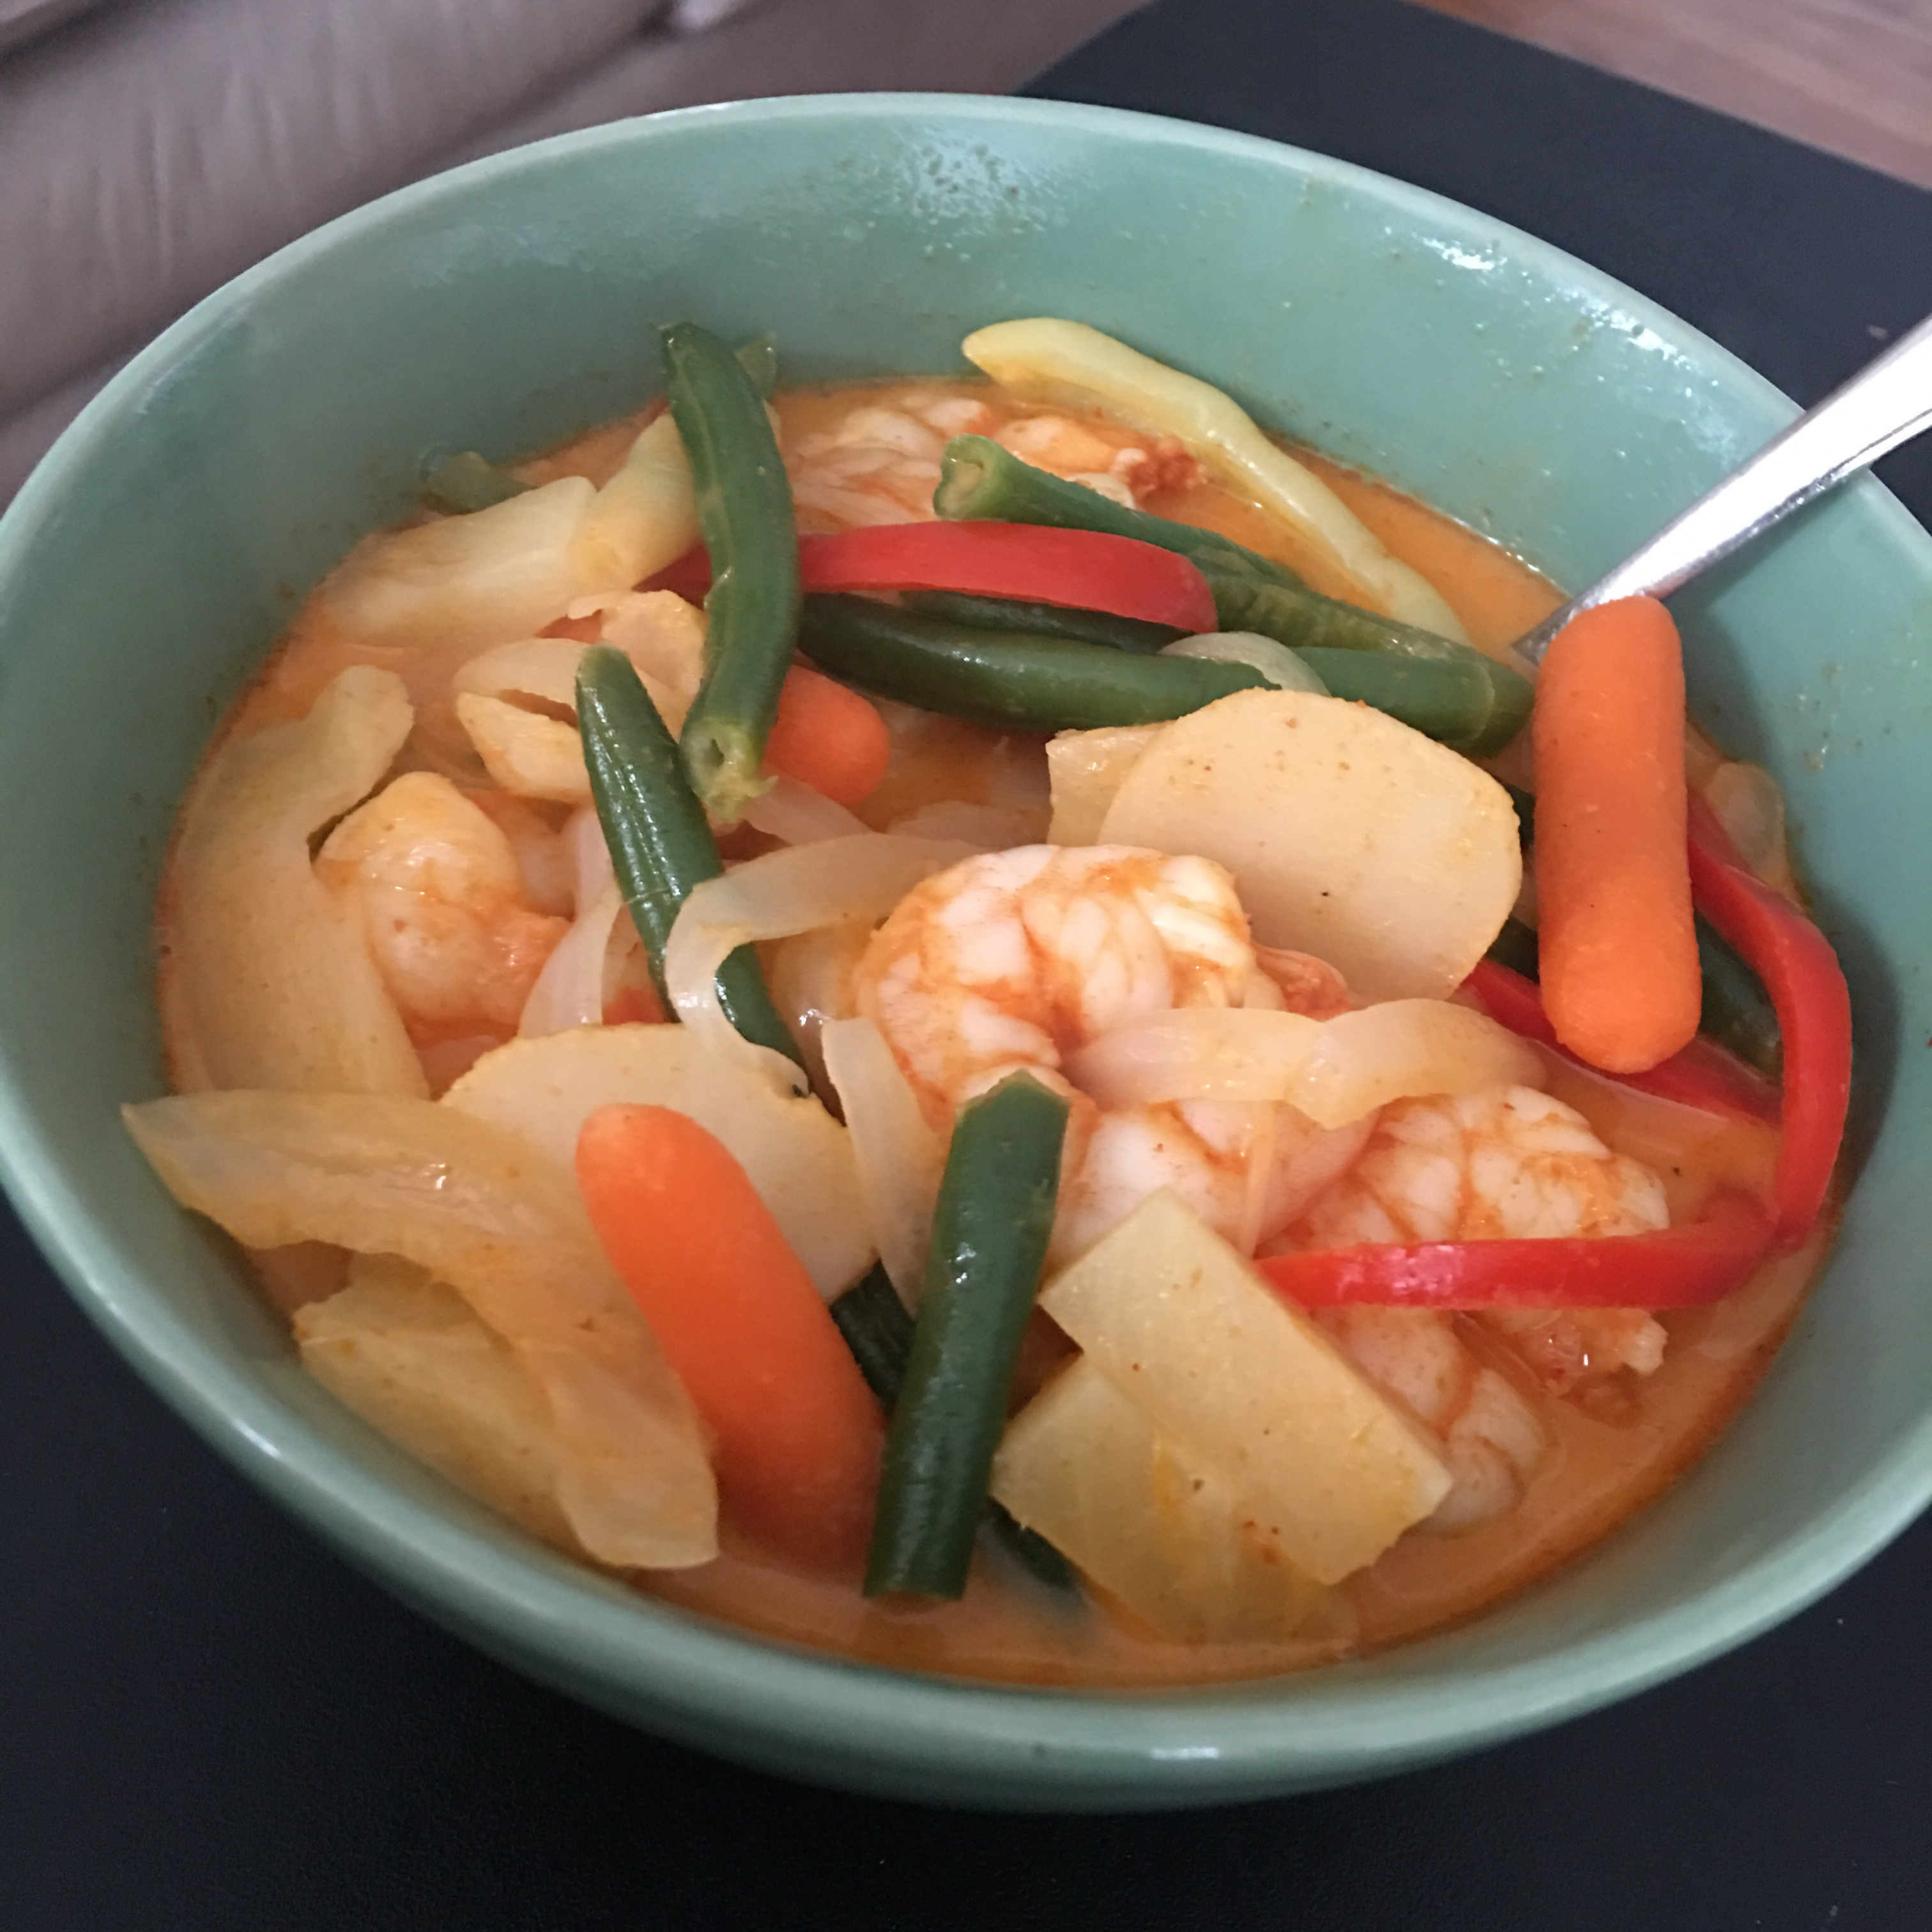 <p>Ready in about 40 minutes, this quick recipe features pineapple and shrimp swimming in a coconut milk broth with red curry paste, fish sauce, and vegetables.  "My family thinks that this is better then at our local Thai restaurant!" says Deb Brown. "You can use less or more of the red curry paste for less or more heat. We like it spicy!"</p>
                          